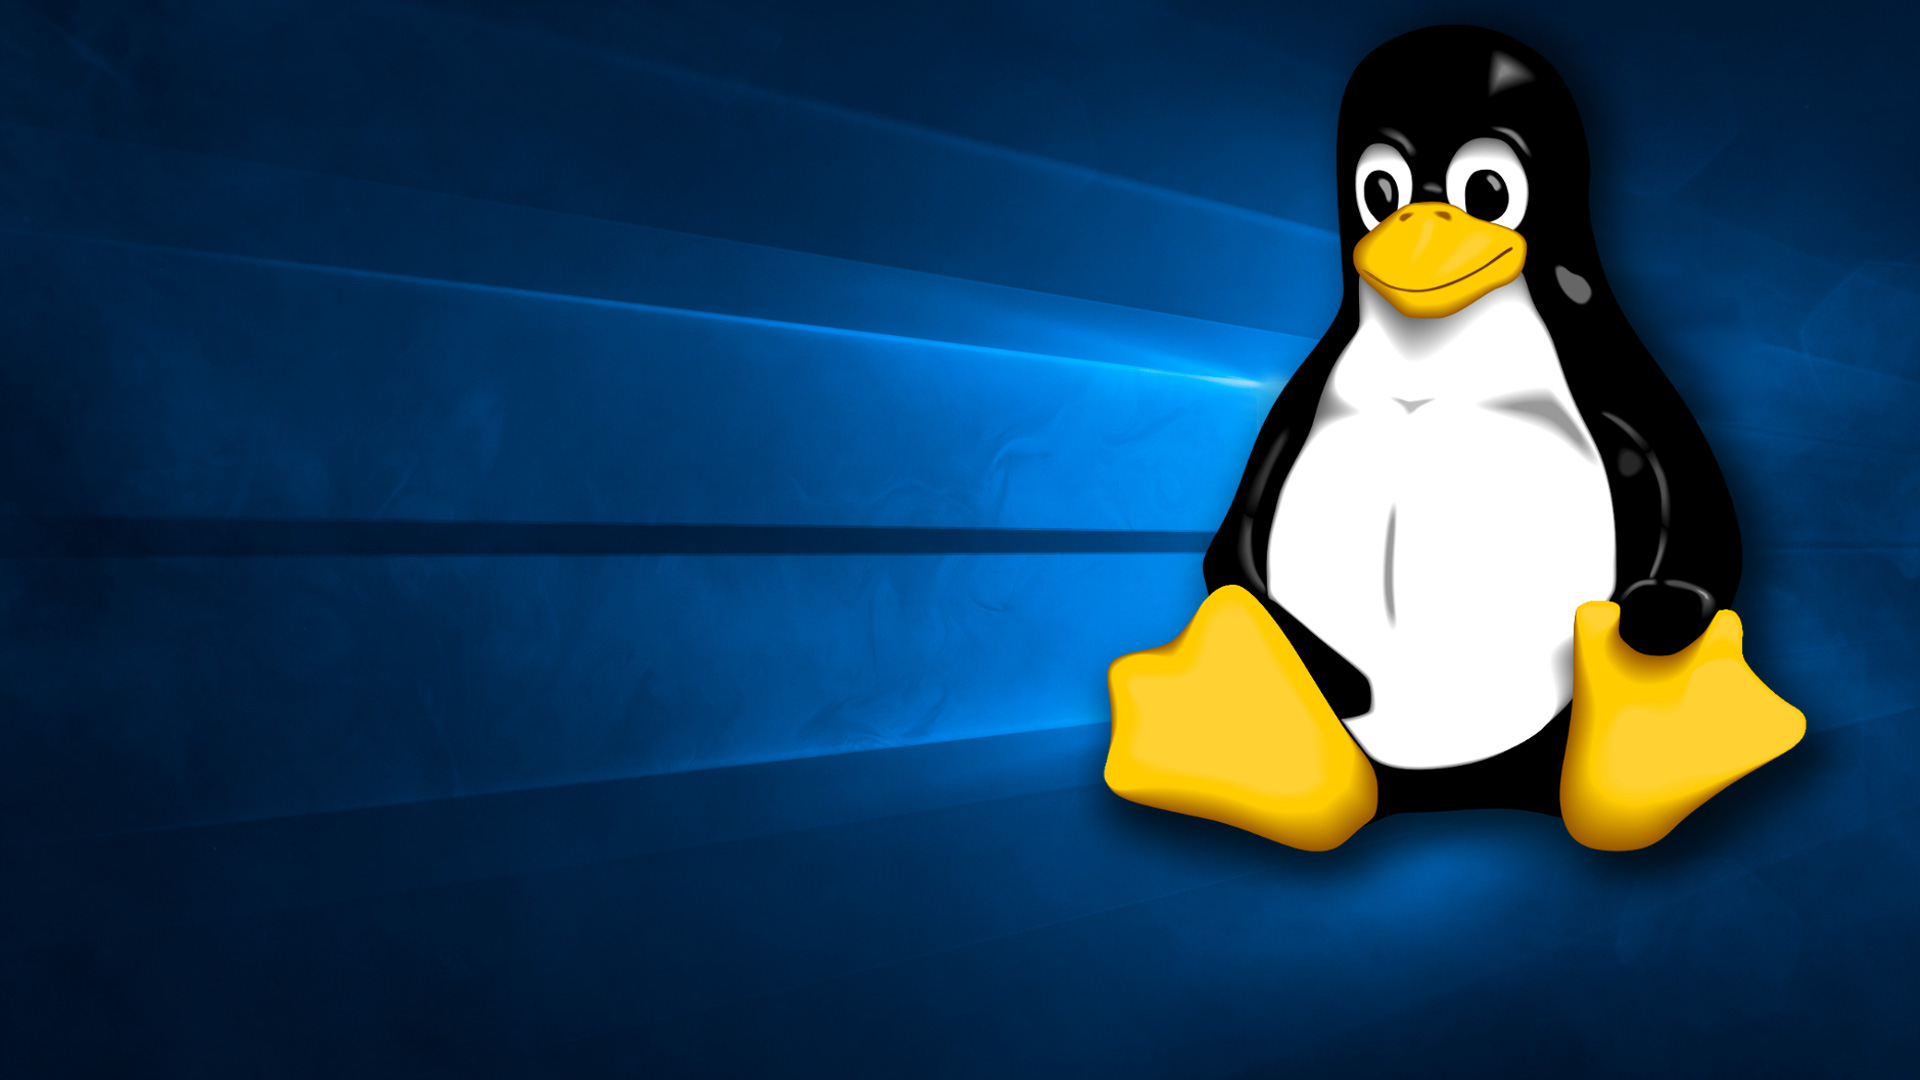 The Windows Wallpaper With Tux Instead Of Logo